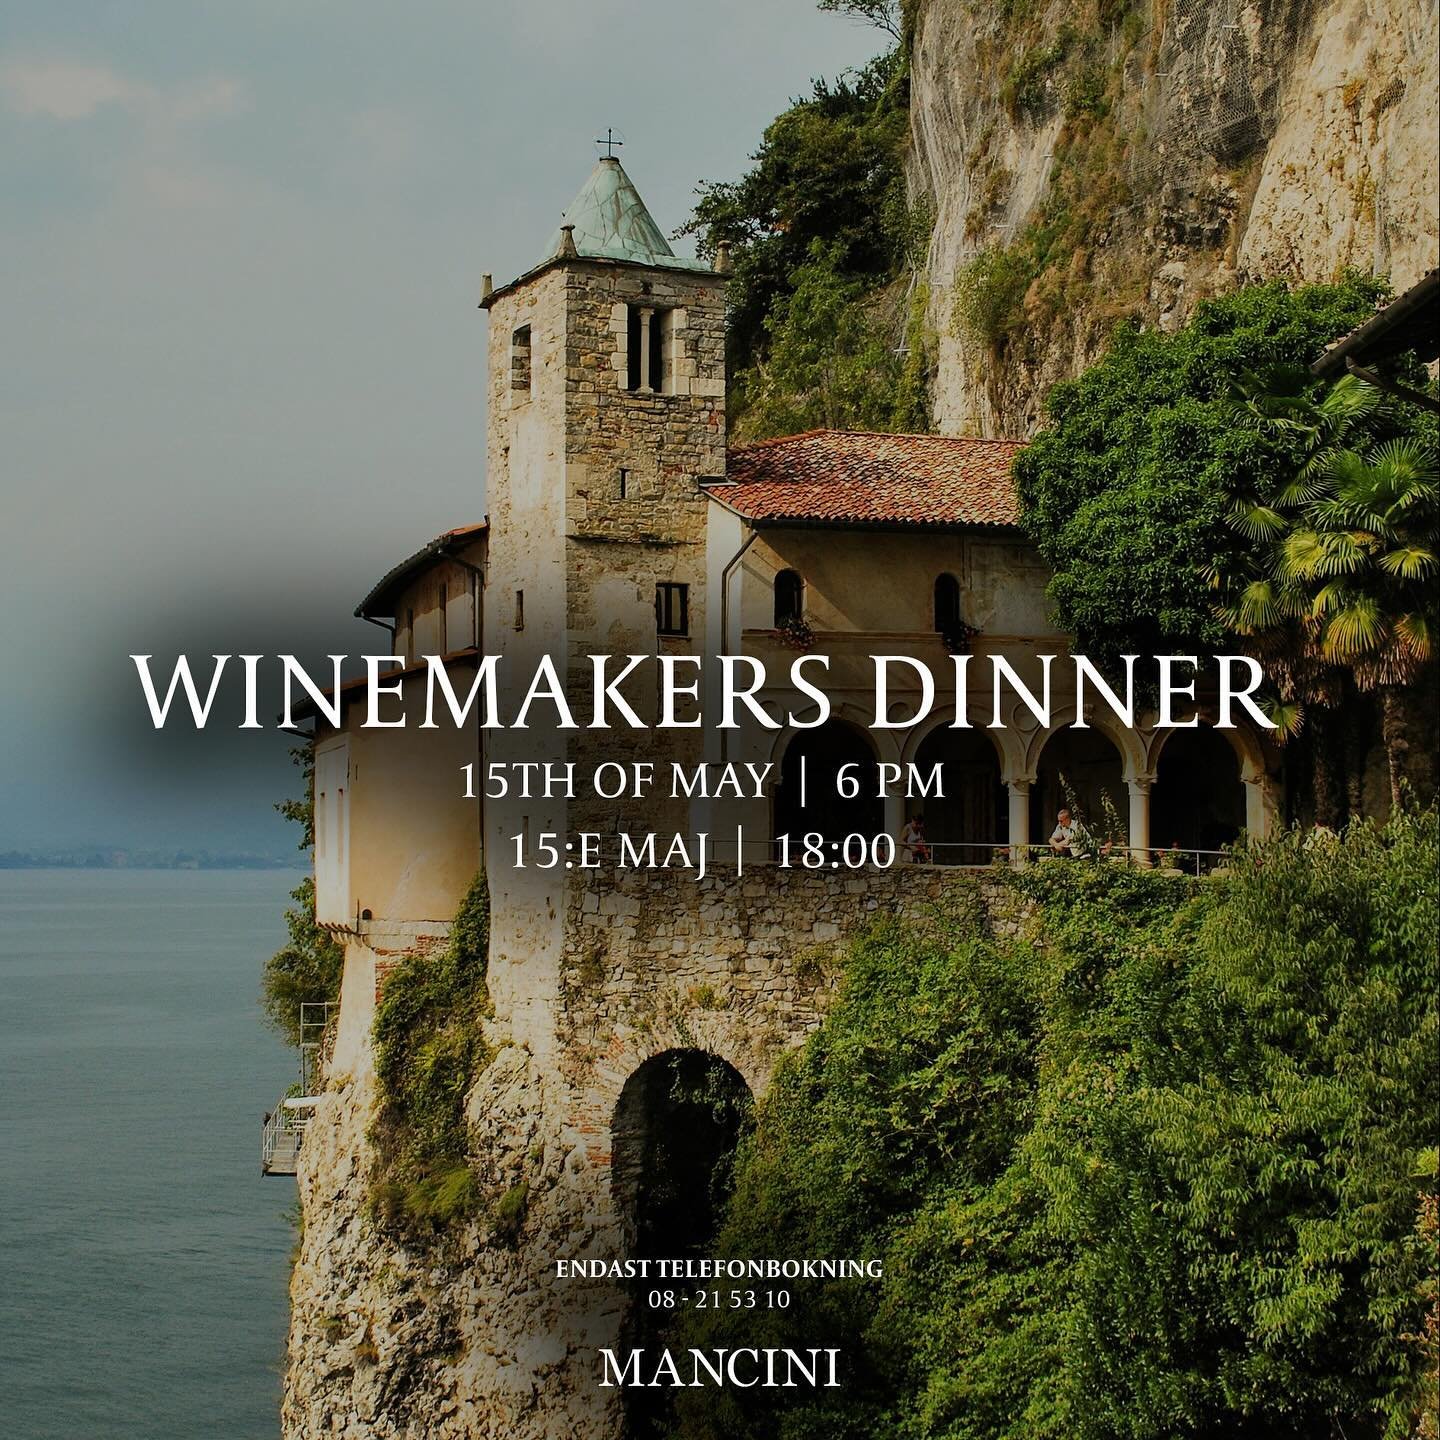 On May 15 we would like to welcome you to a new Winemakers Dinner here at Mancini.🍴

In collaboration with Mancini, Codero di Montezemolo and wine producer Oenoforos, will present a menu based on the flavors and memories of beautiful Piemonte and It